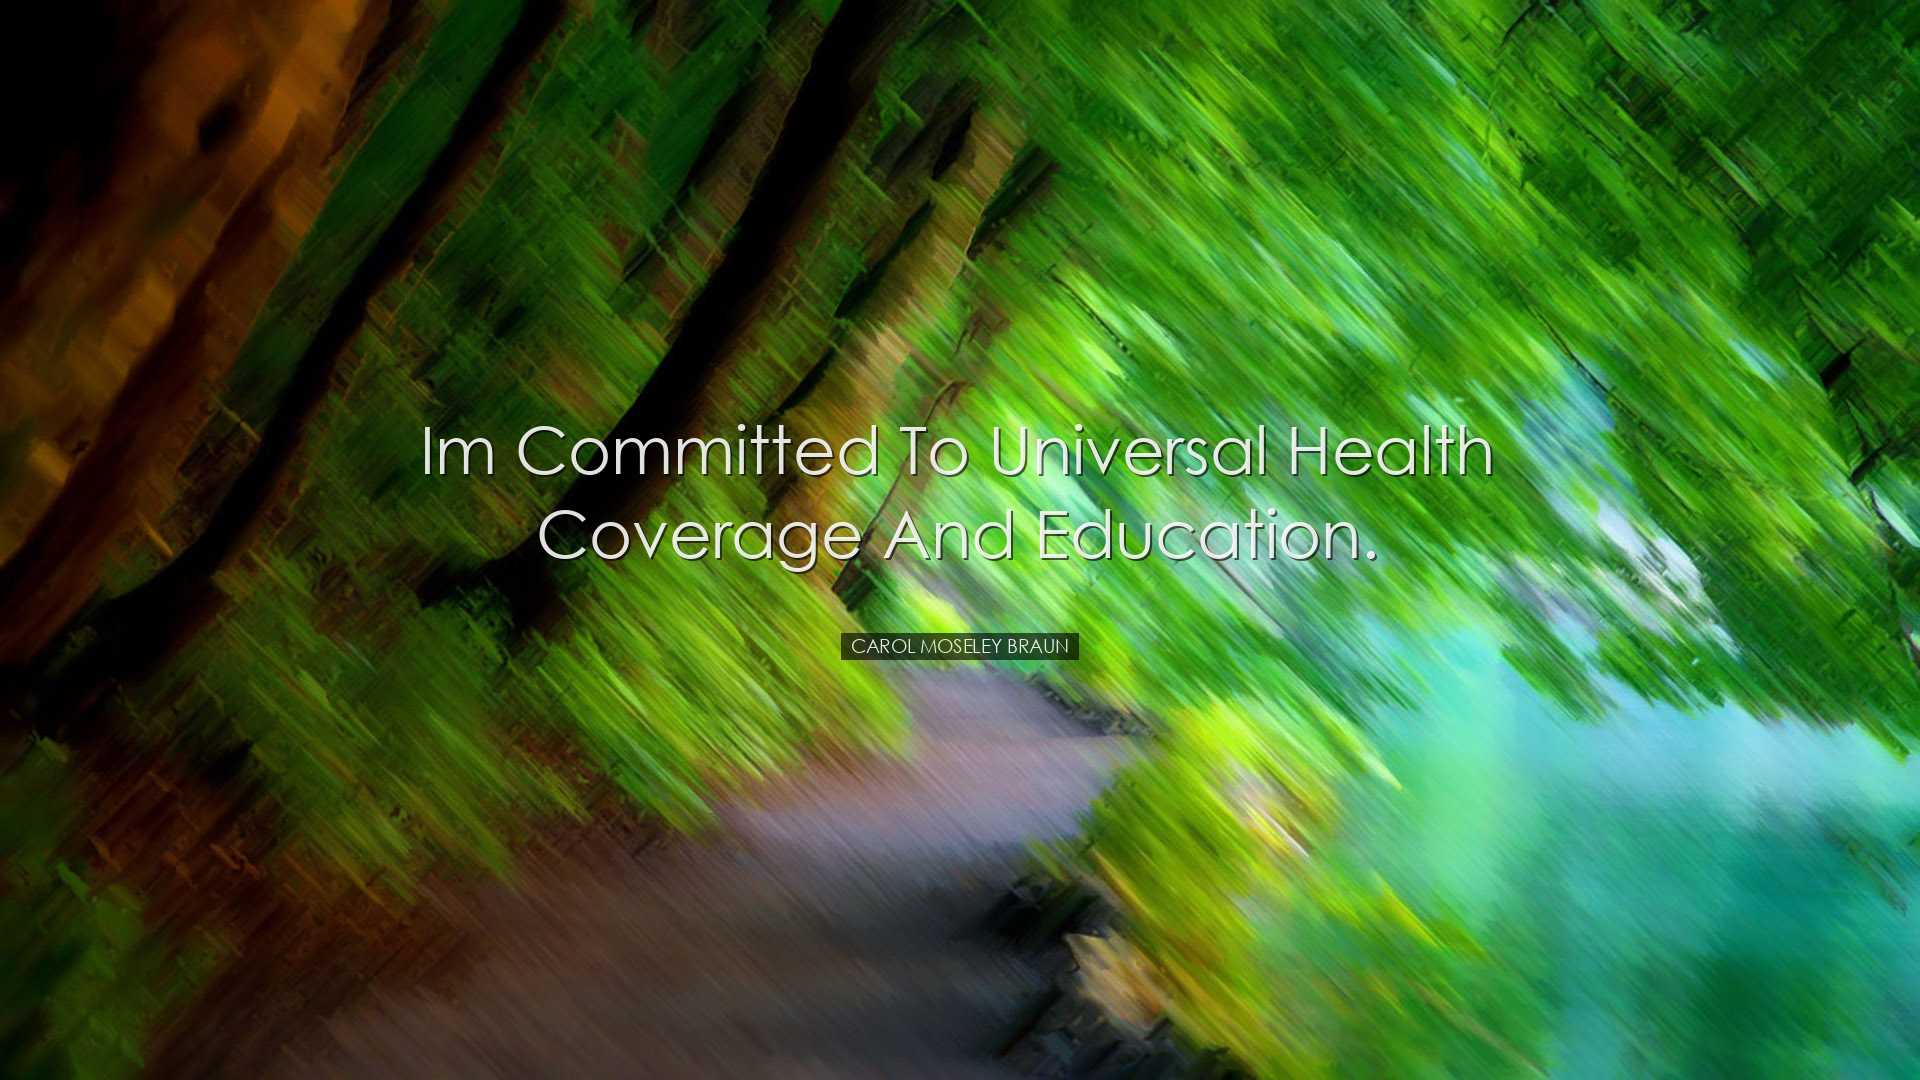 Im committed to universal health coverage and education. - Carol M